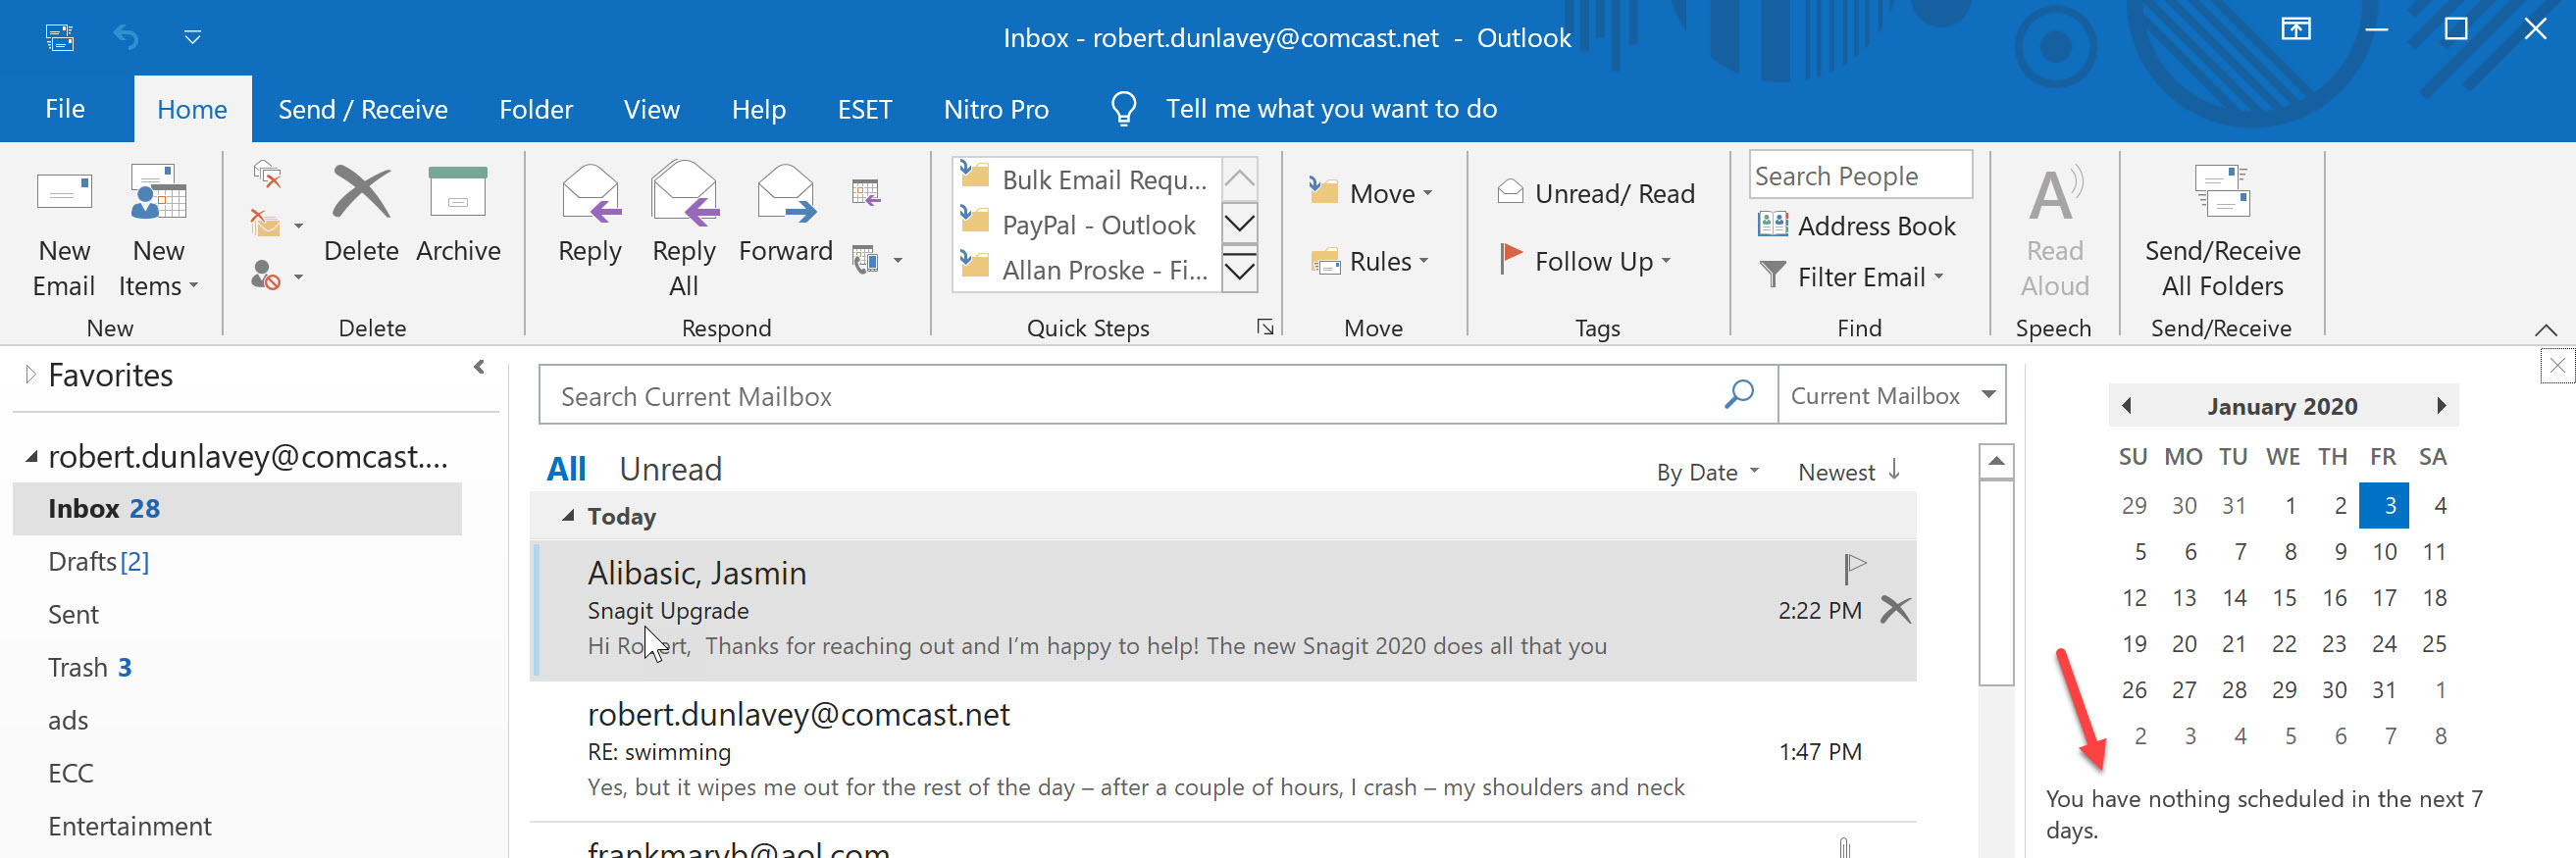 Outlook 2016 Not Syncing Calendars in "Mail" View vs. "Calendar" View